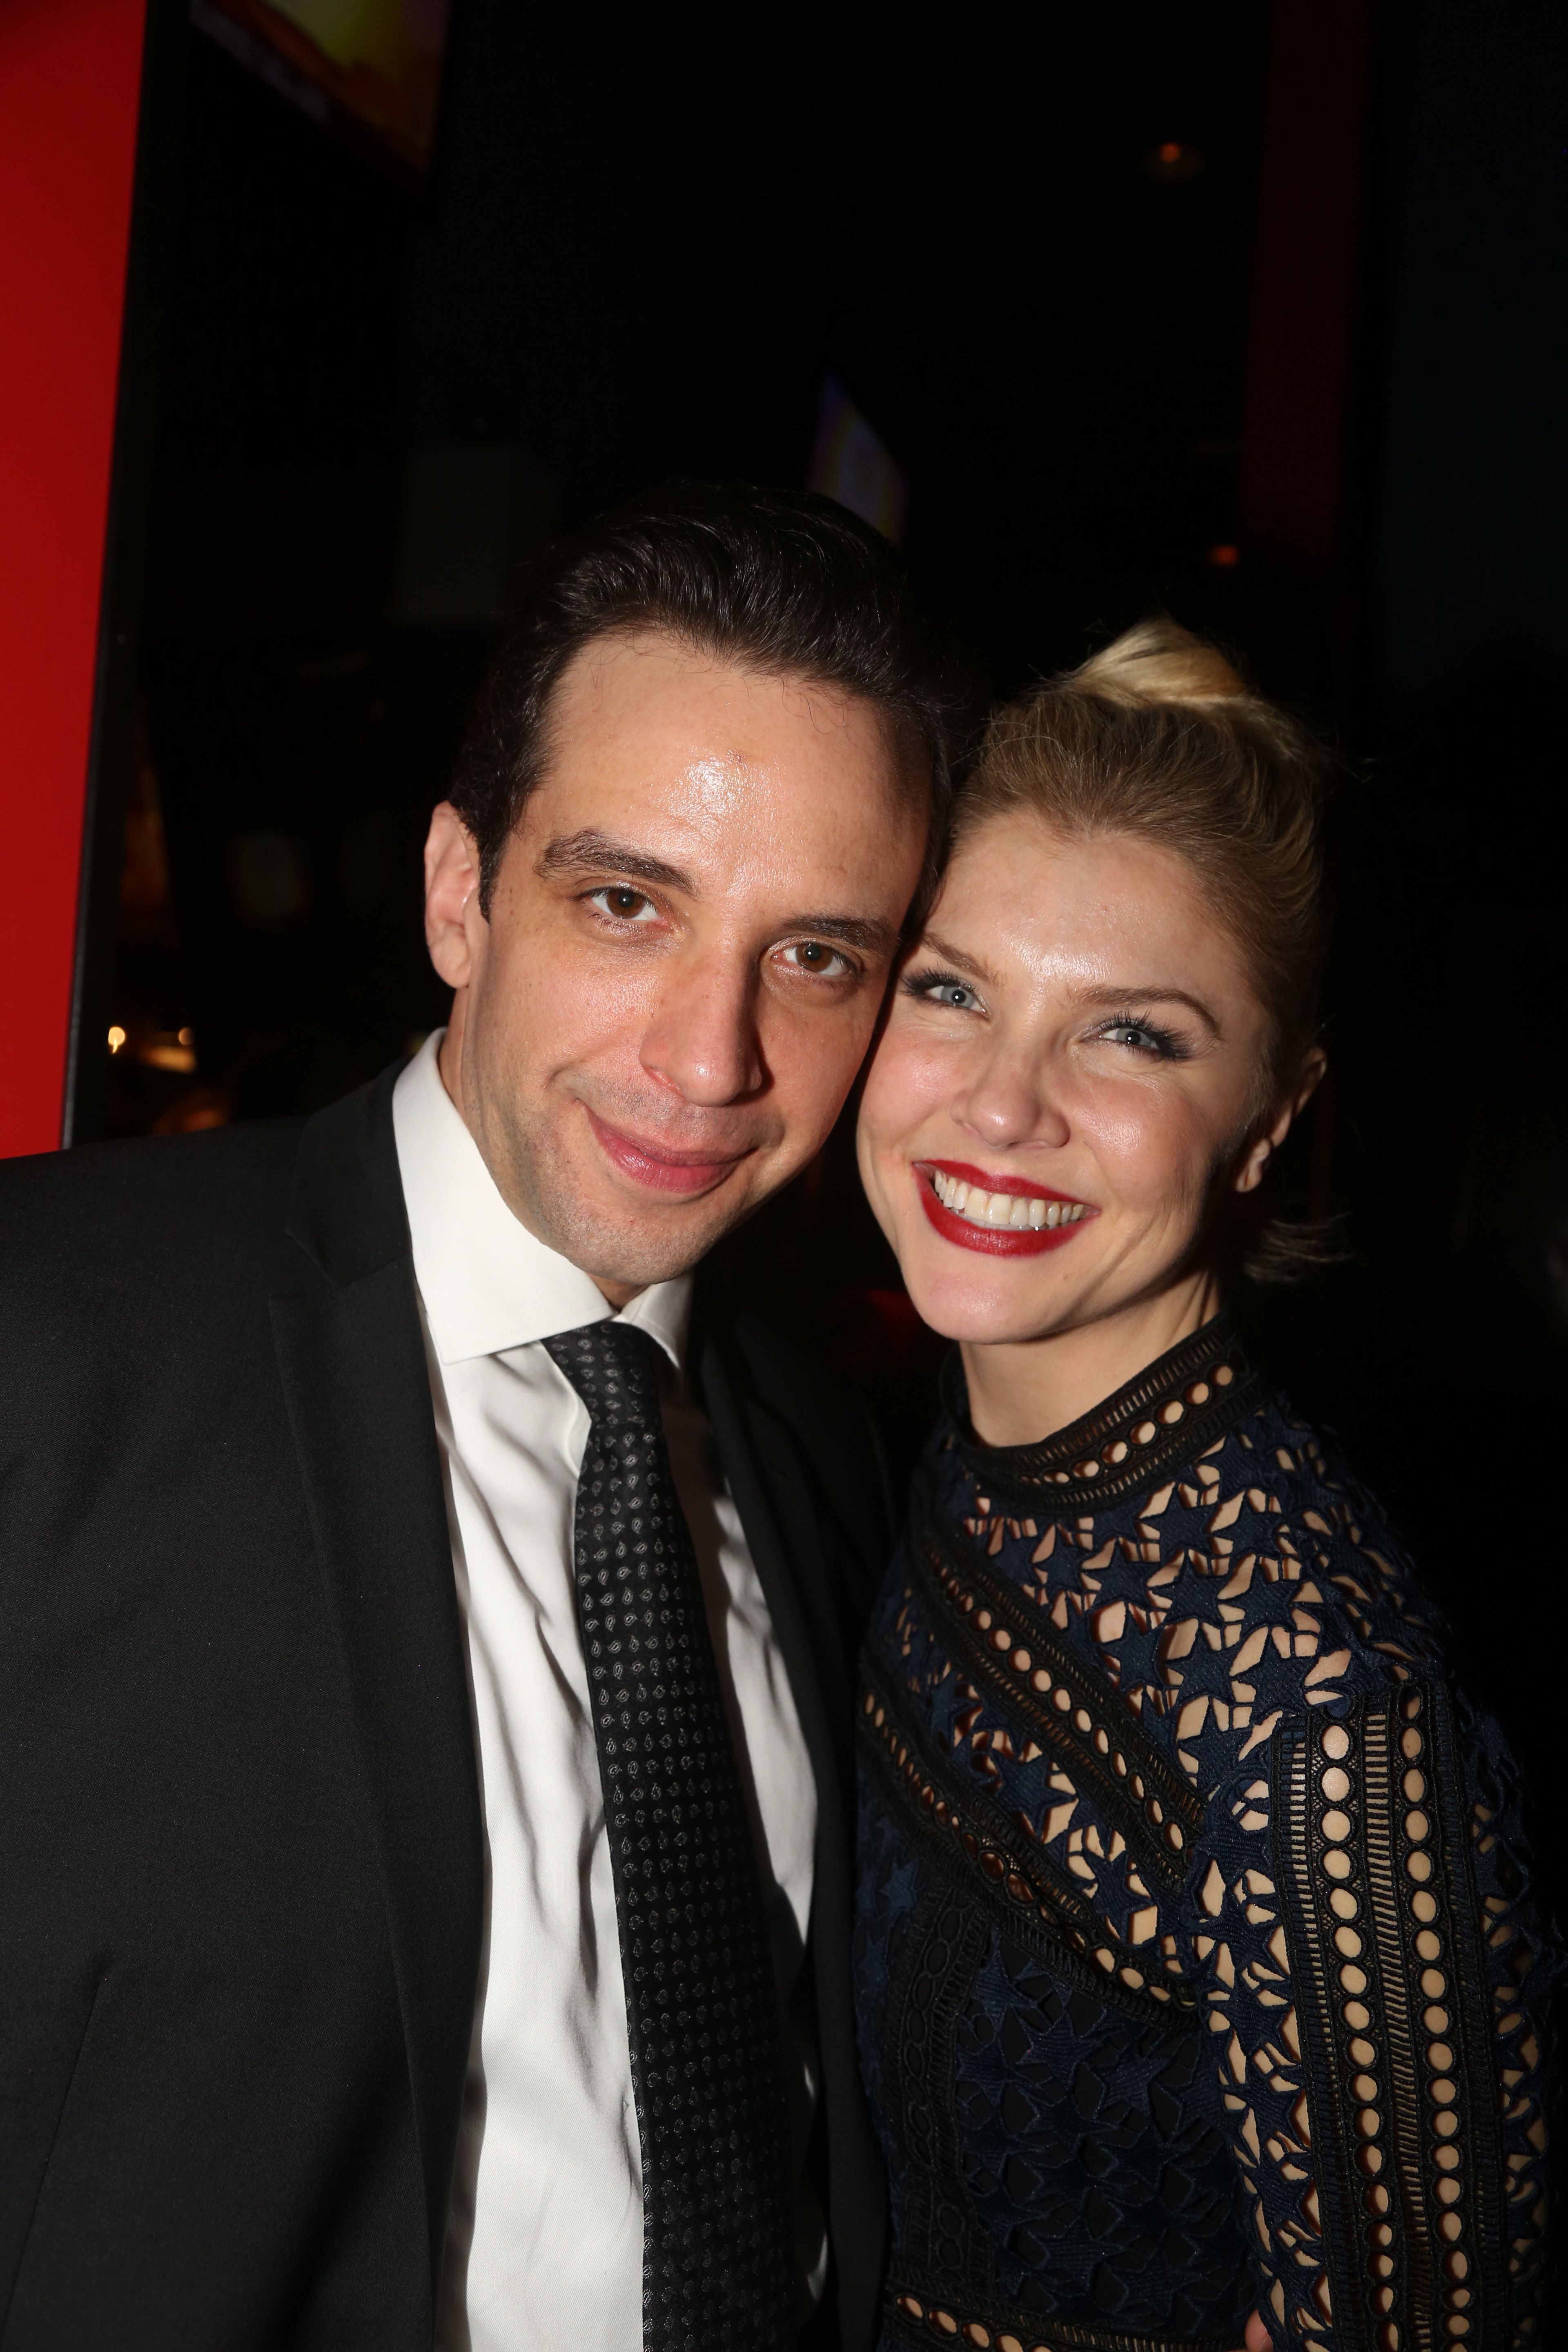 Nick Cordero and Amanda Kloots pose at the after party for Manhattan Concert Production's Broadway Series "Crazy For You" on February 19, 2017 in New York City | Photo: Getty Images  